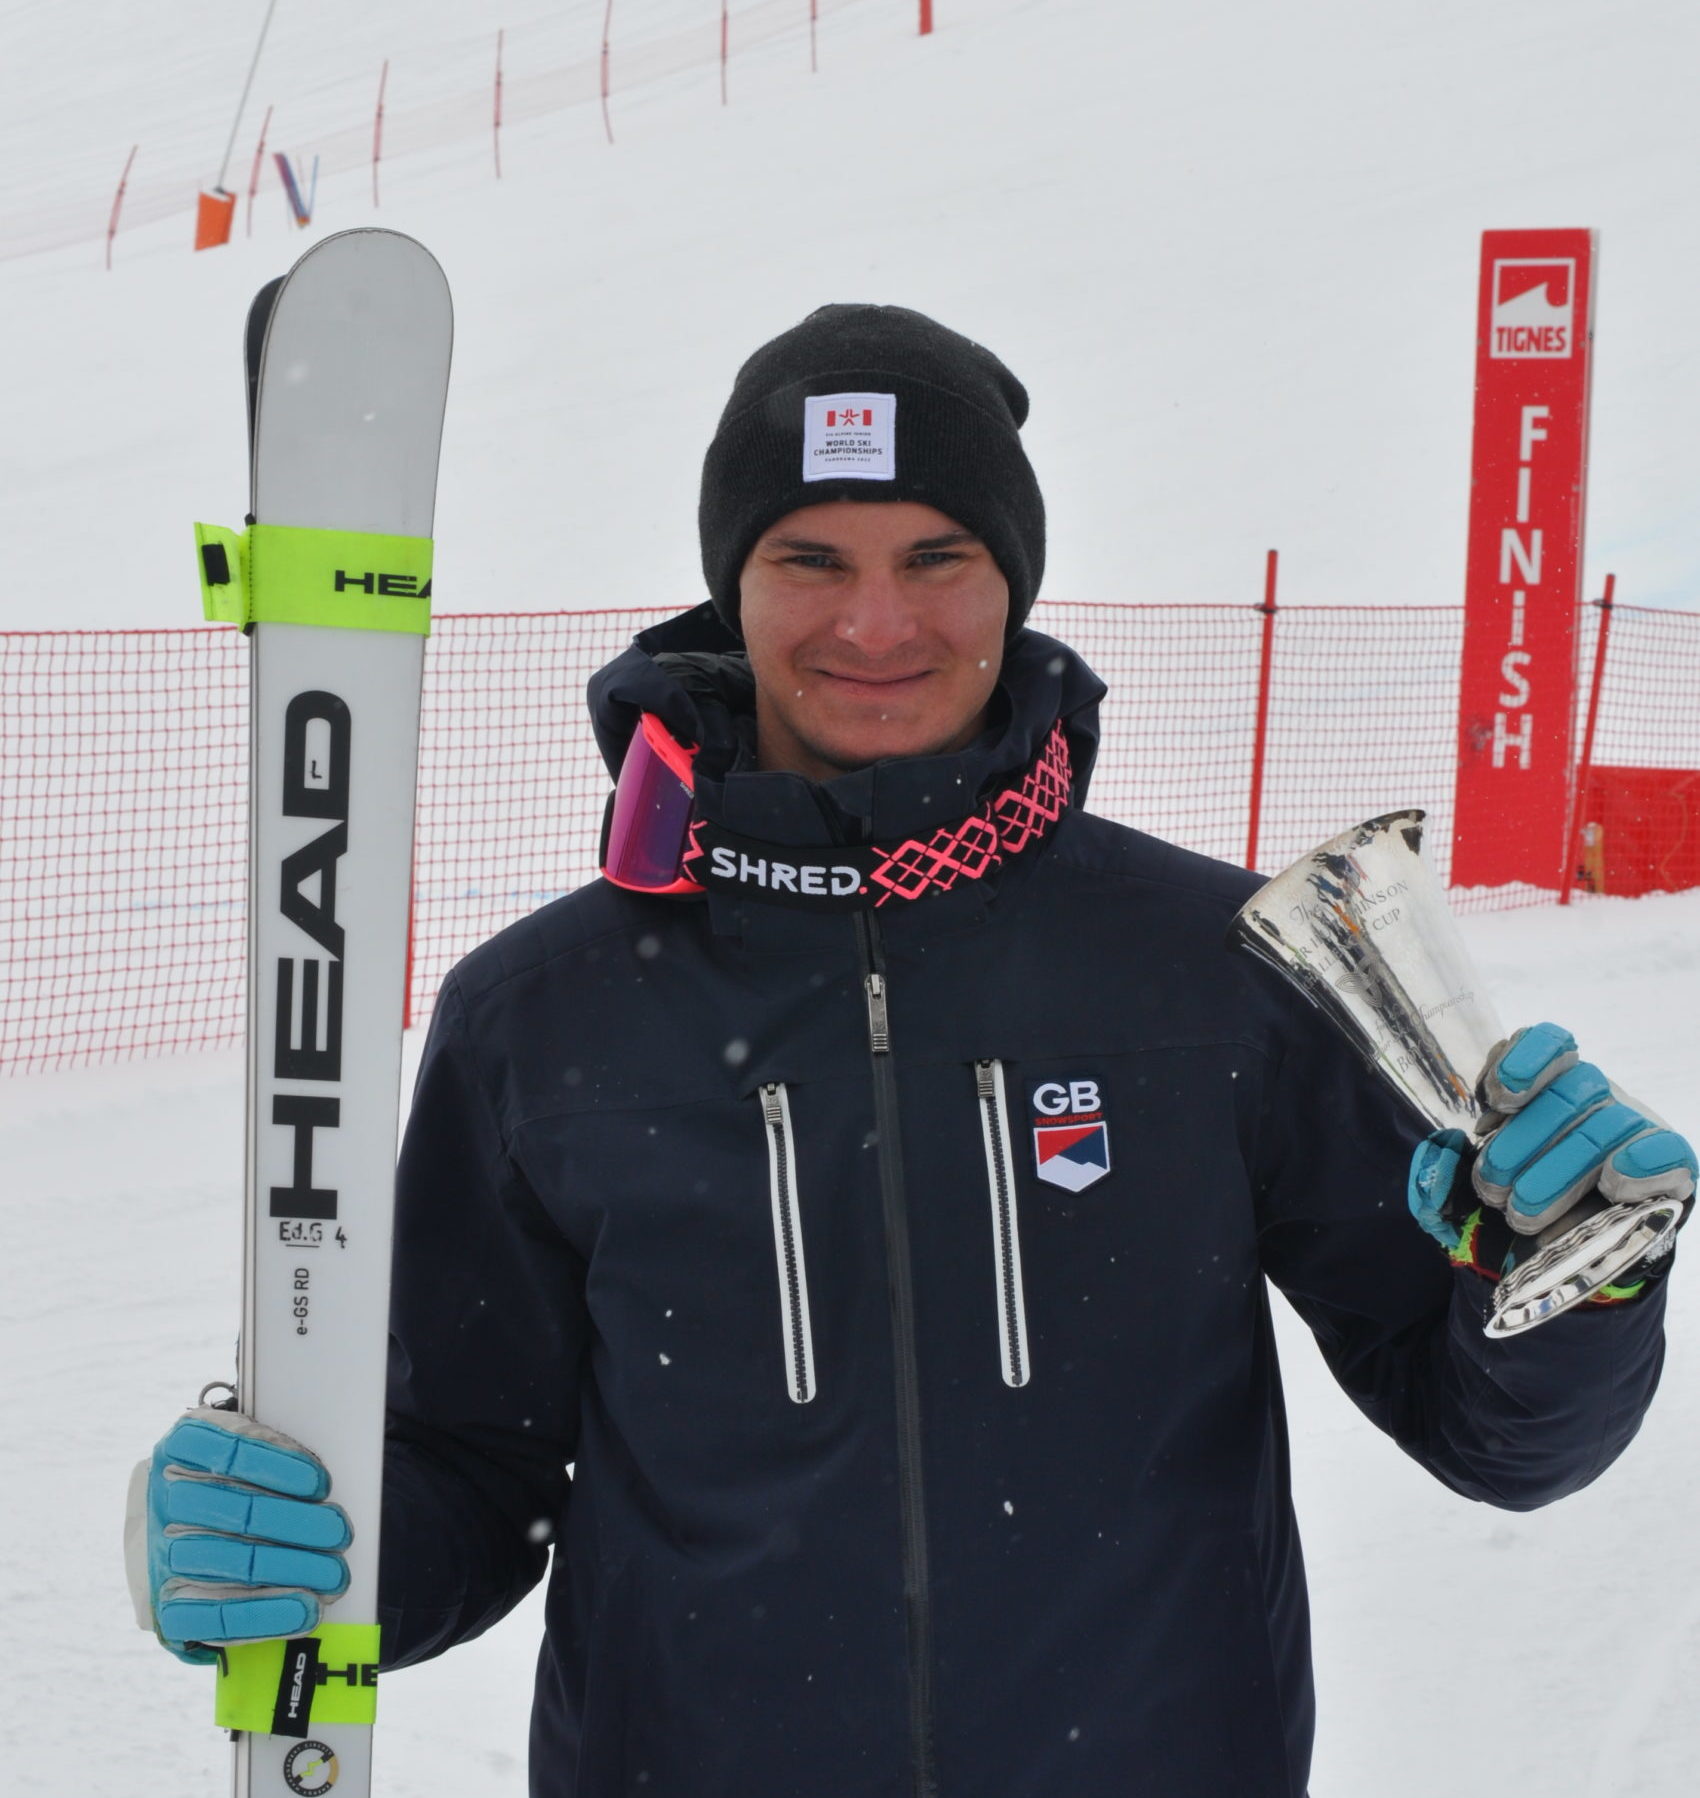 Palla and Guigonnet take NJC titles as first week of GB Alpine Championships draws to a close